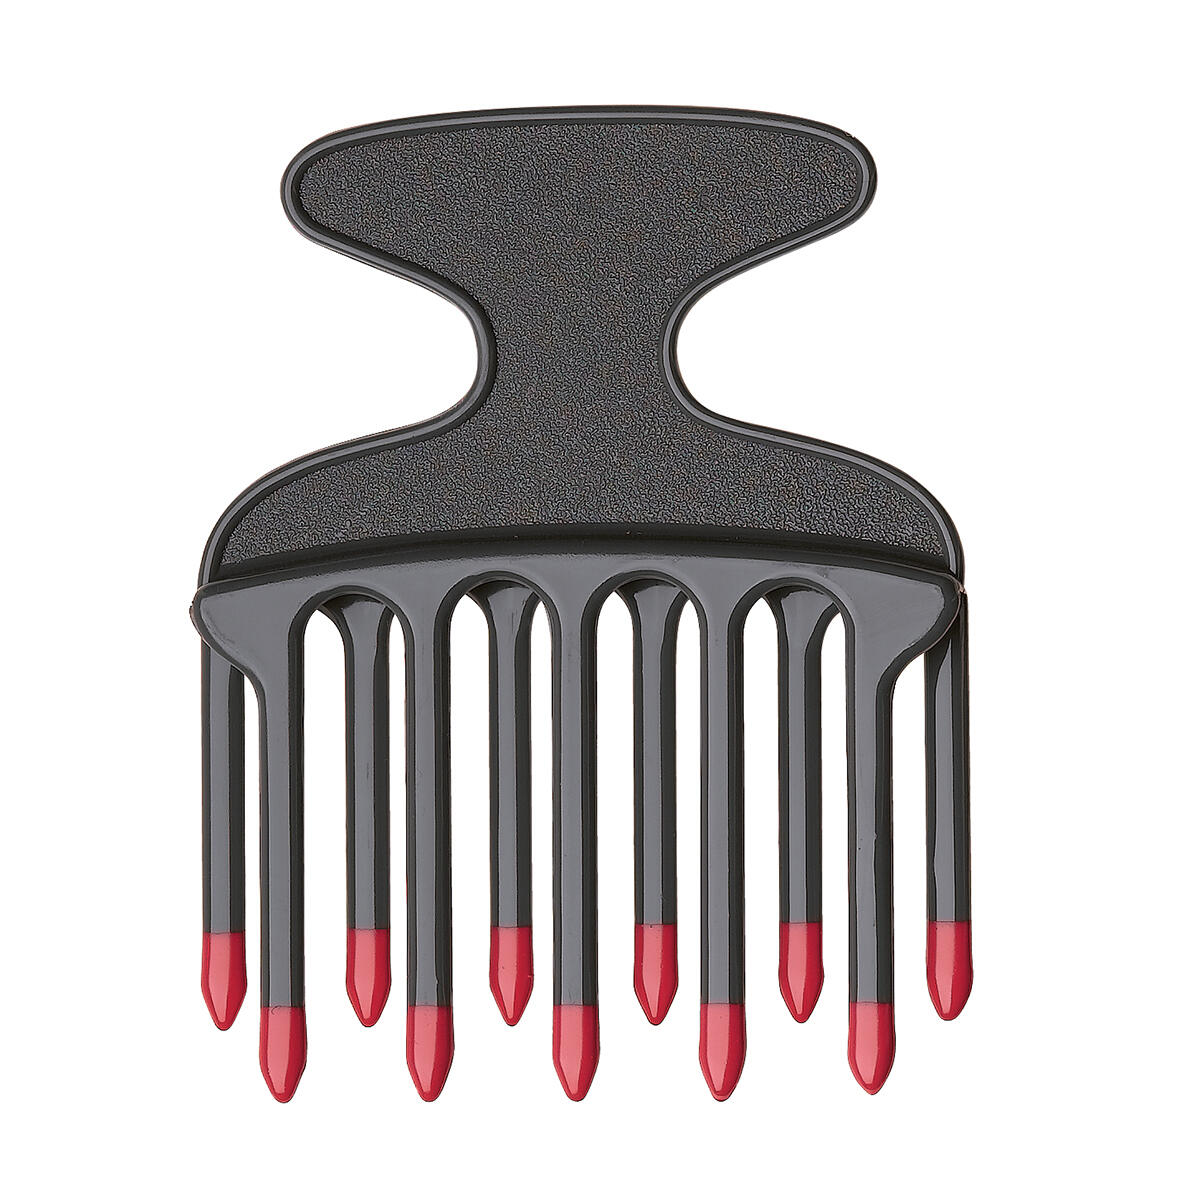 Afro comb null